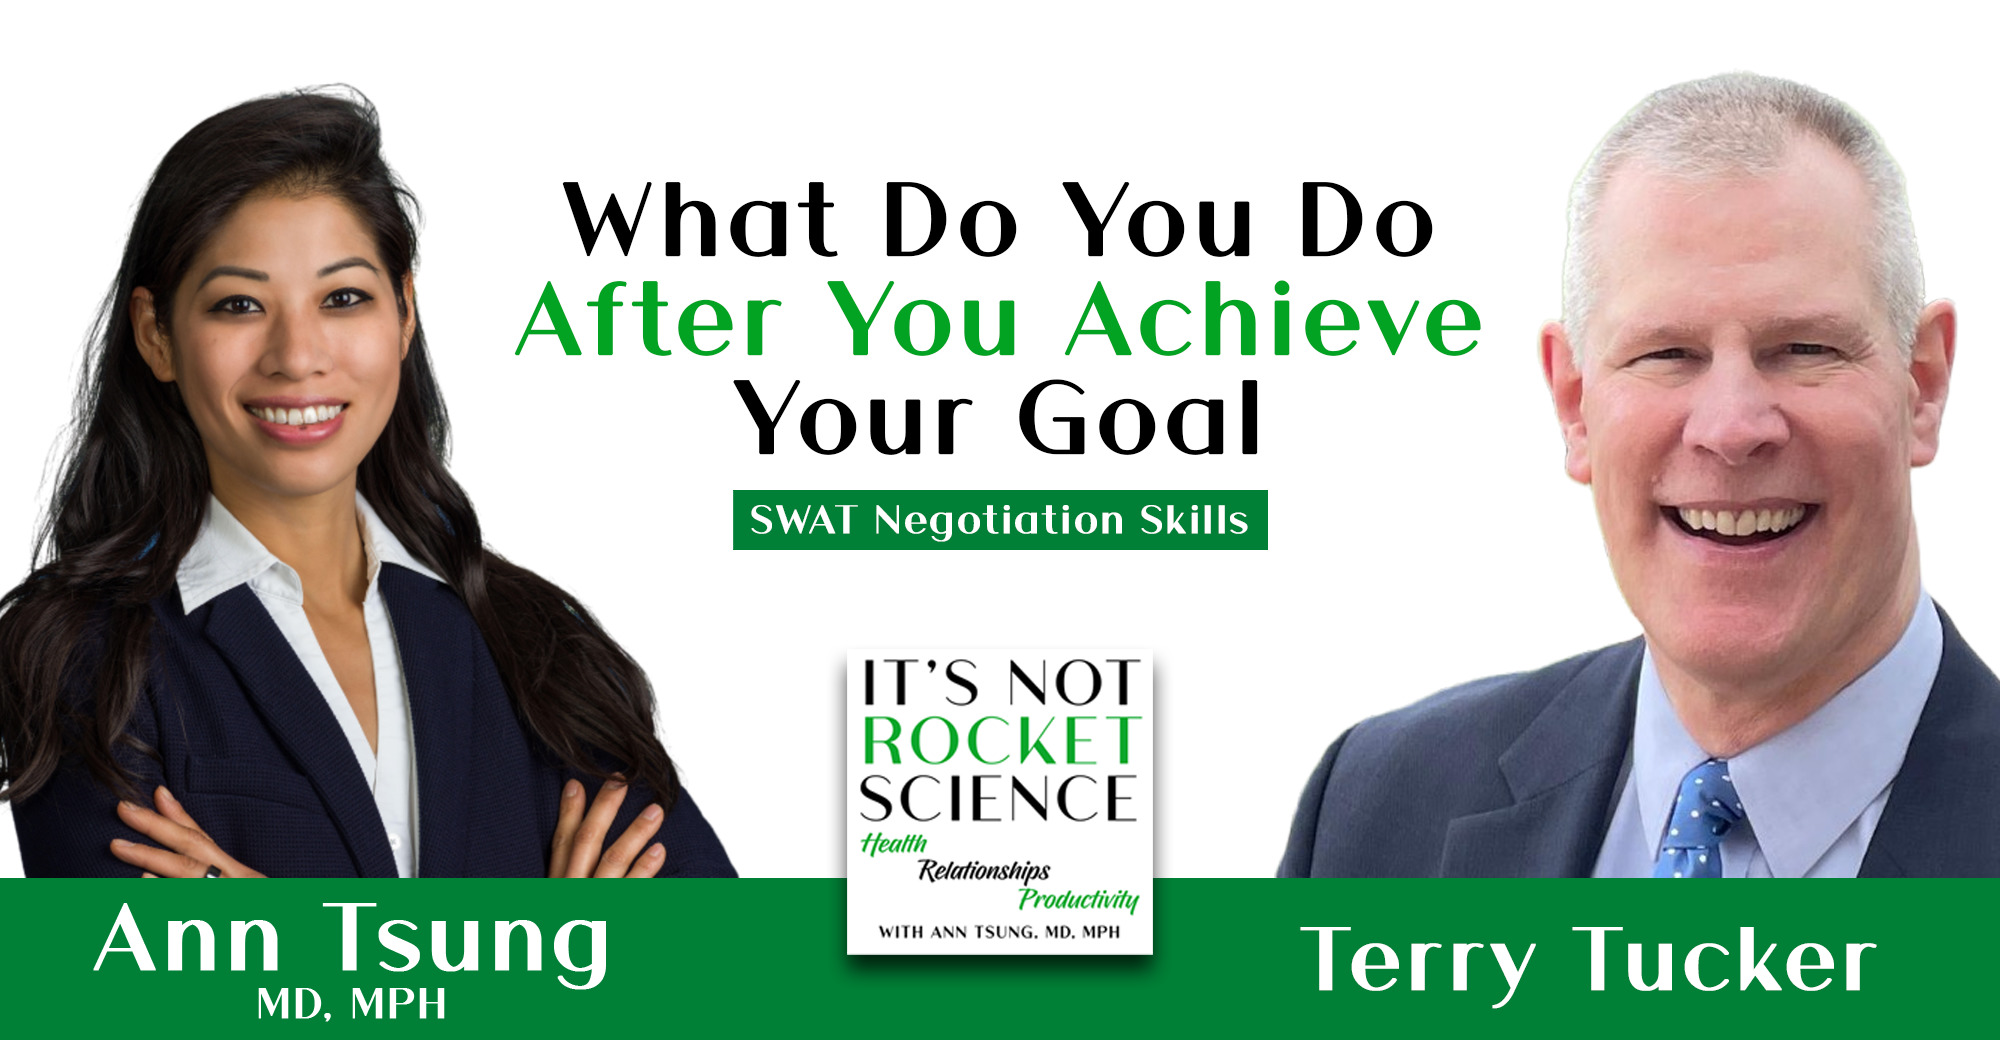 033. What Do You Do After You Achieve Your Goal | SWAT Negotiation Skills with Terry Tucker